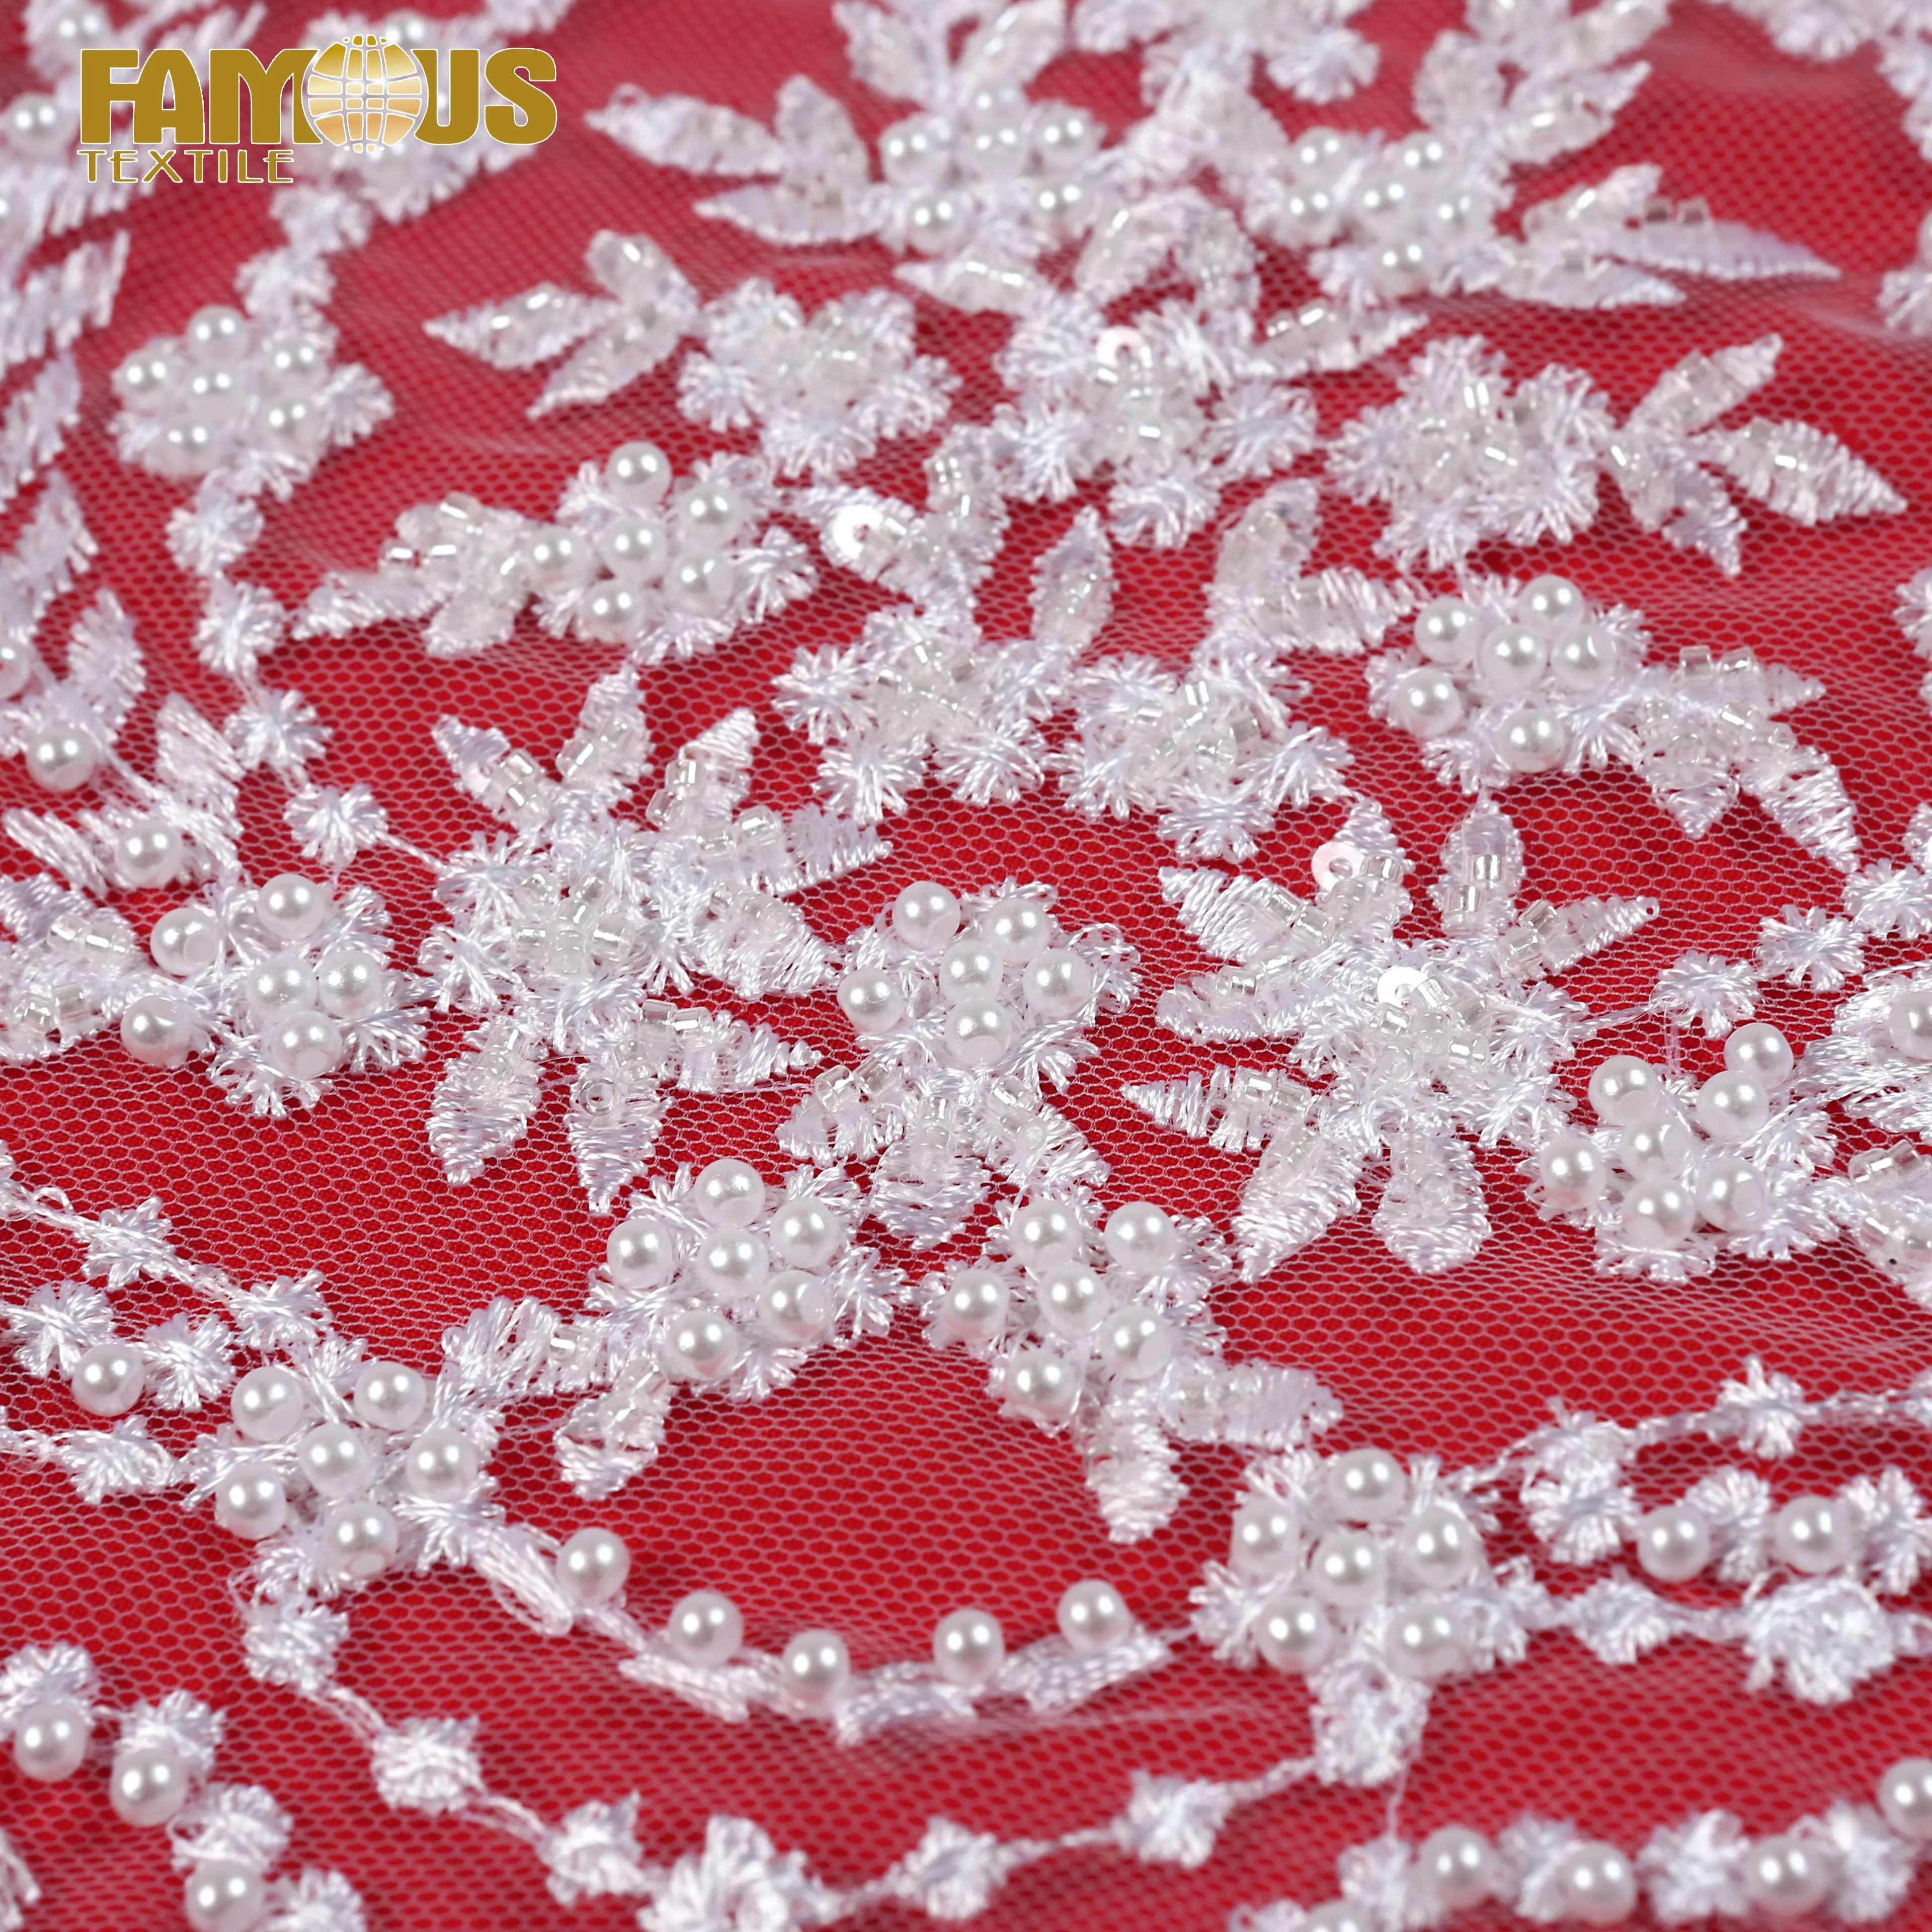 high-end white beaded embroidery lace tulle fabric with silver sequins and pearls for bridal veil